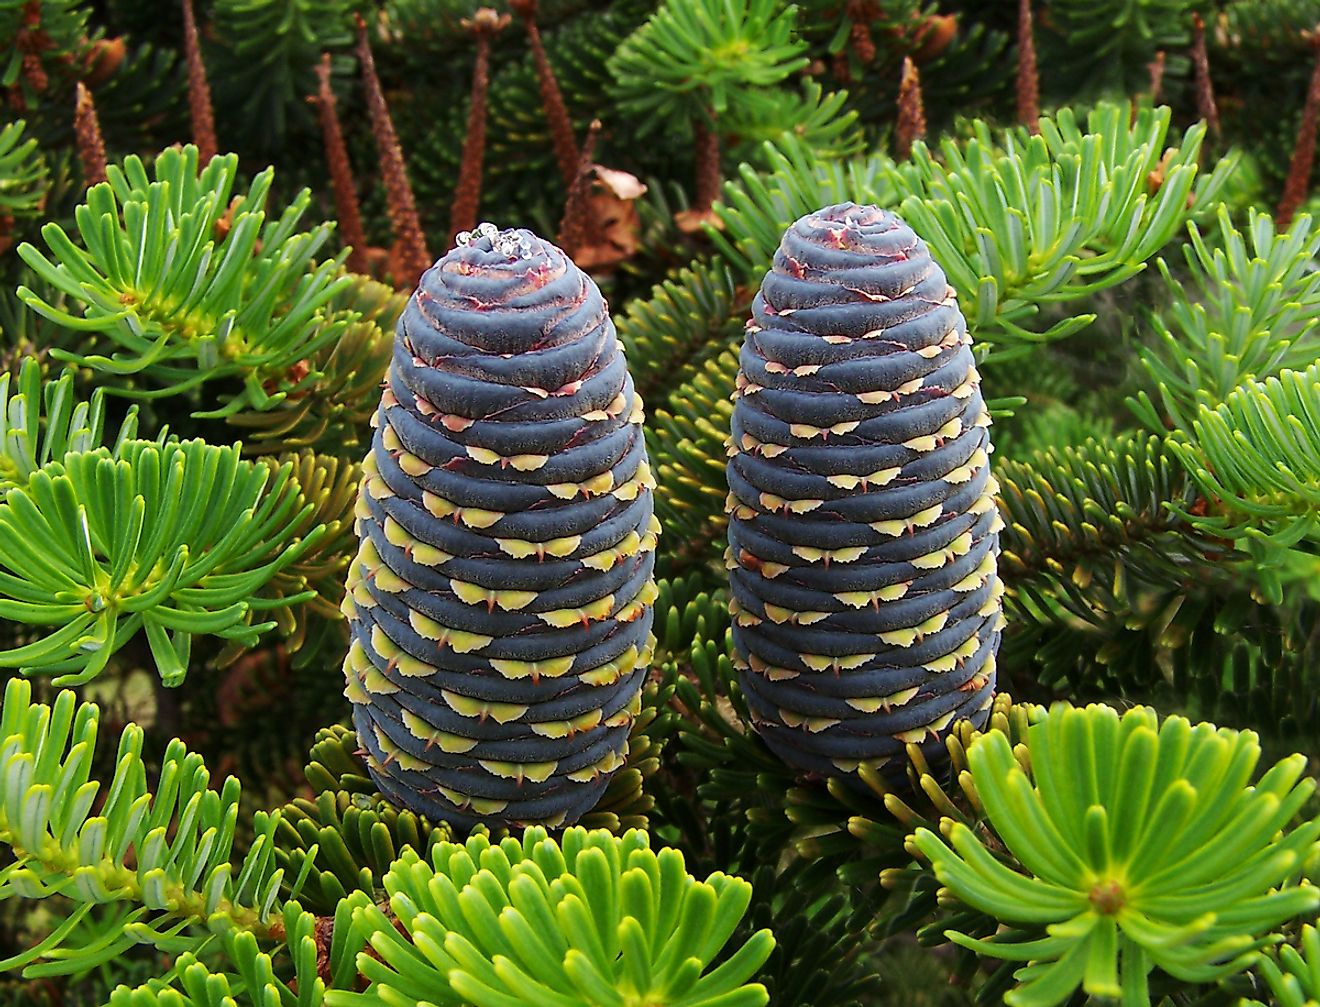 The Korean fir is an endangered species of plant that grows in specific locations across South Korea.